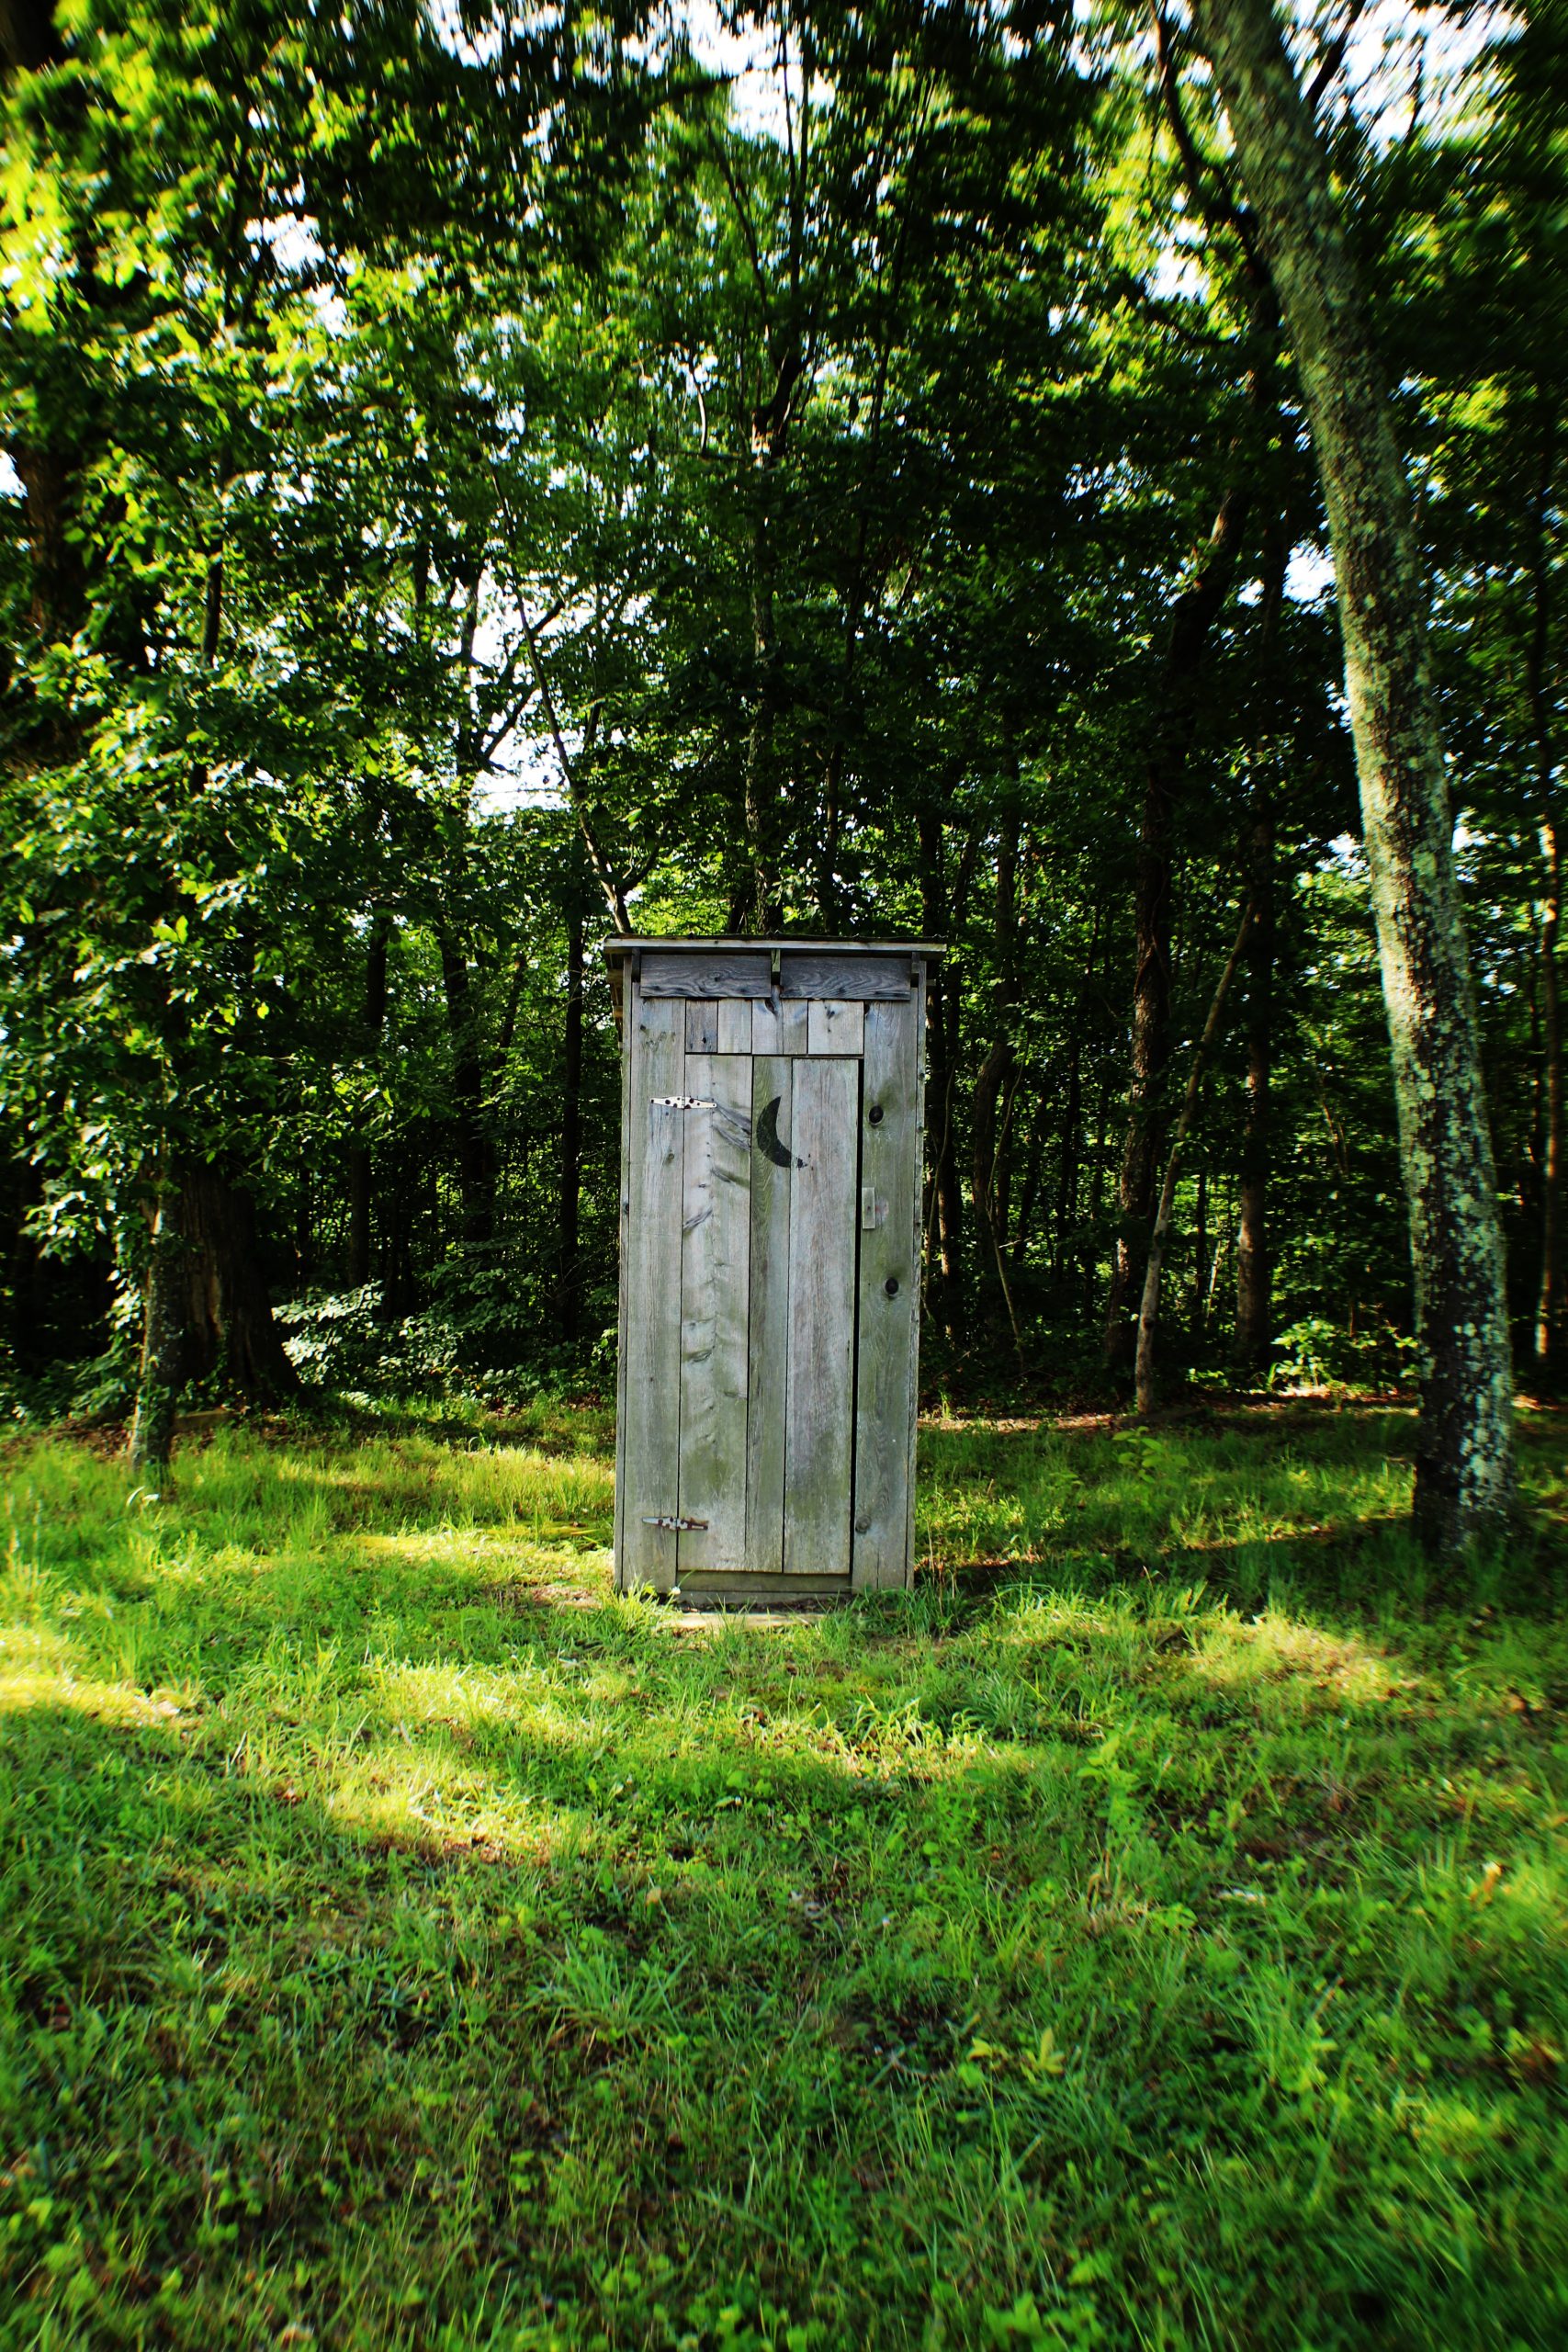 An outhouse in the middle of a wooded area.